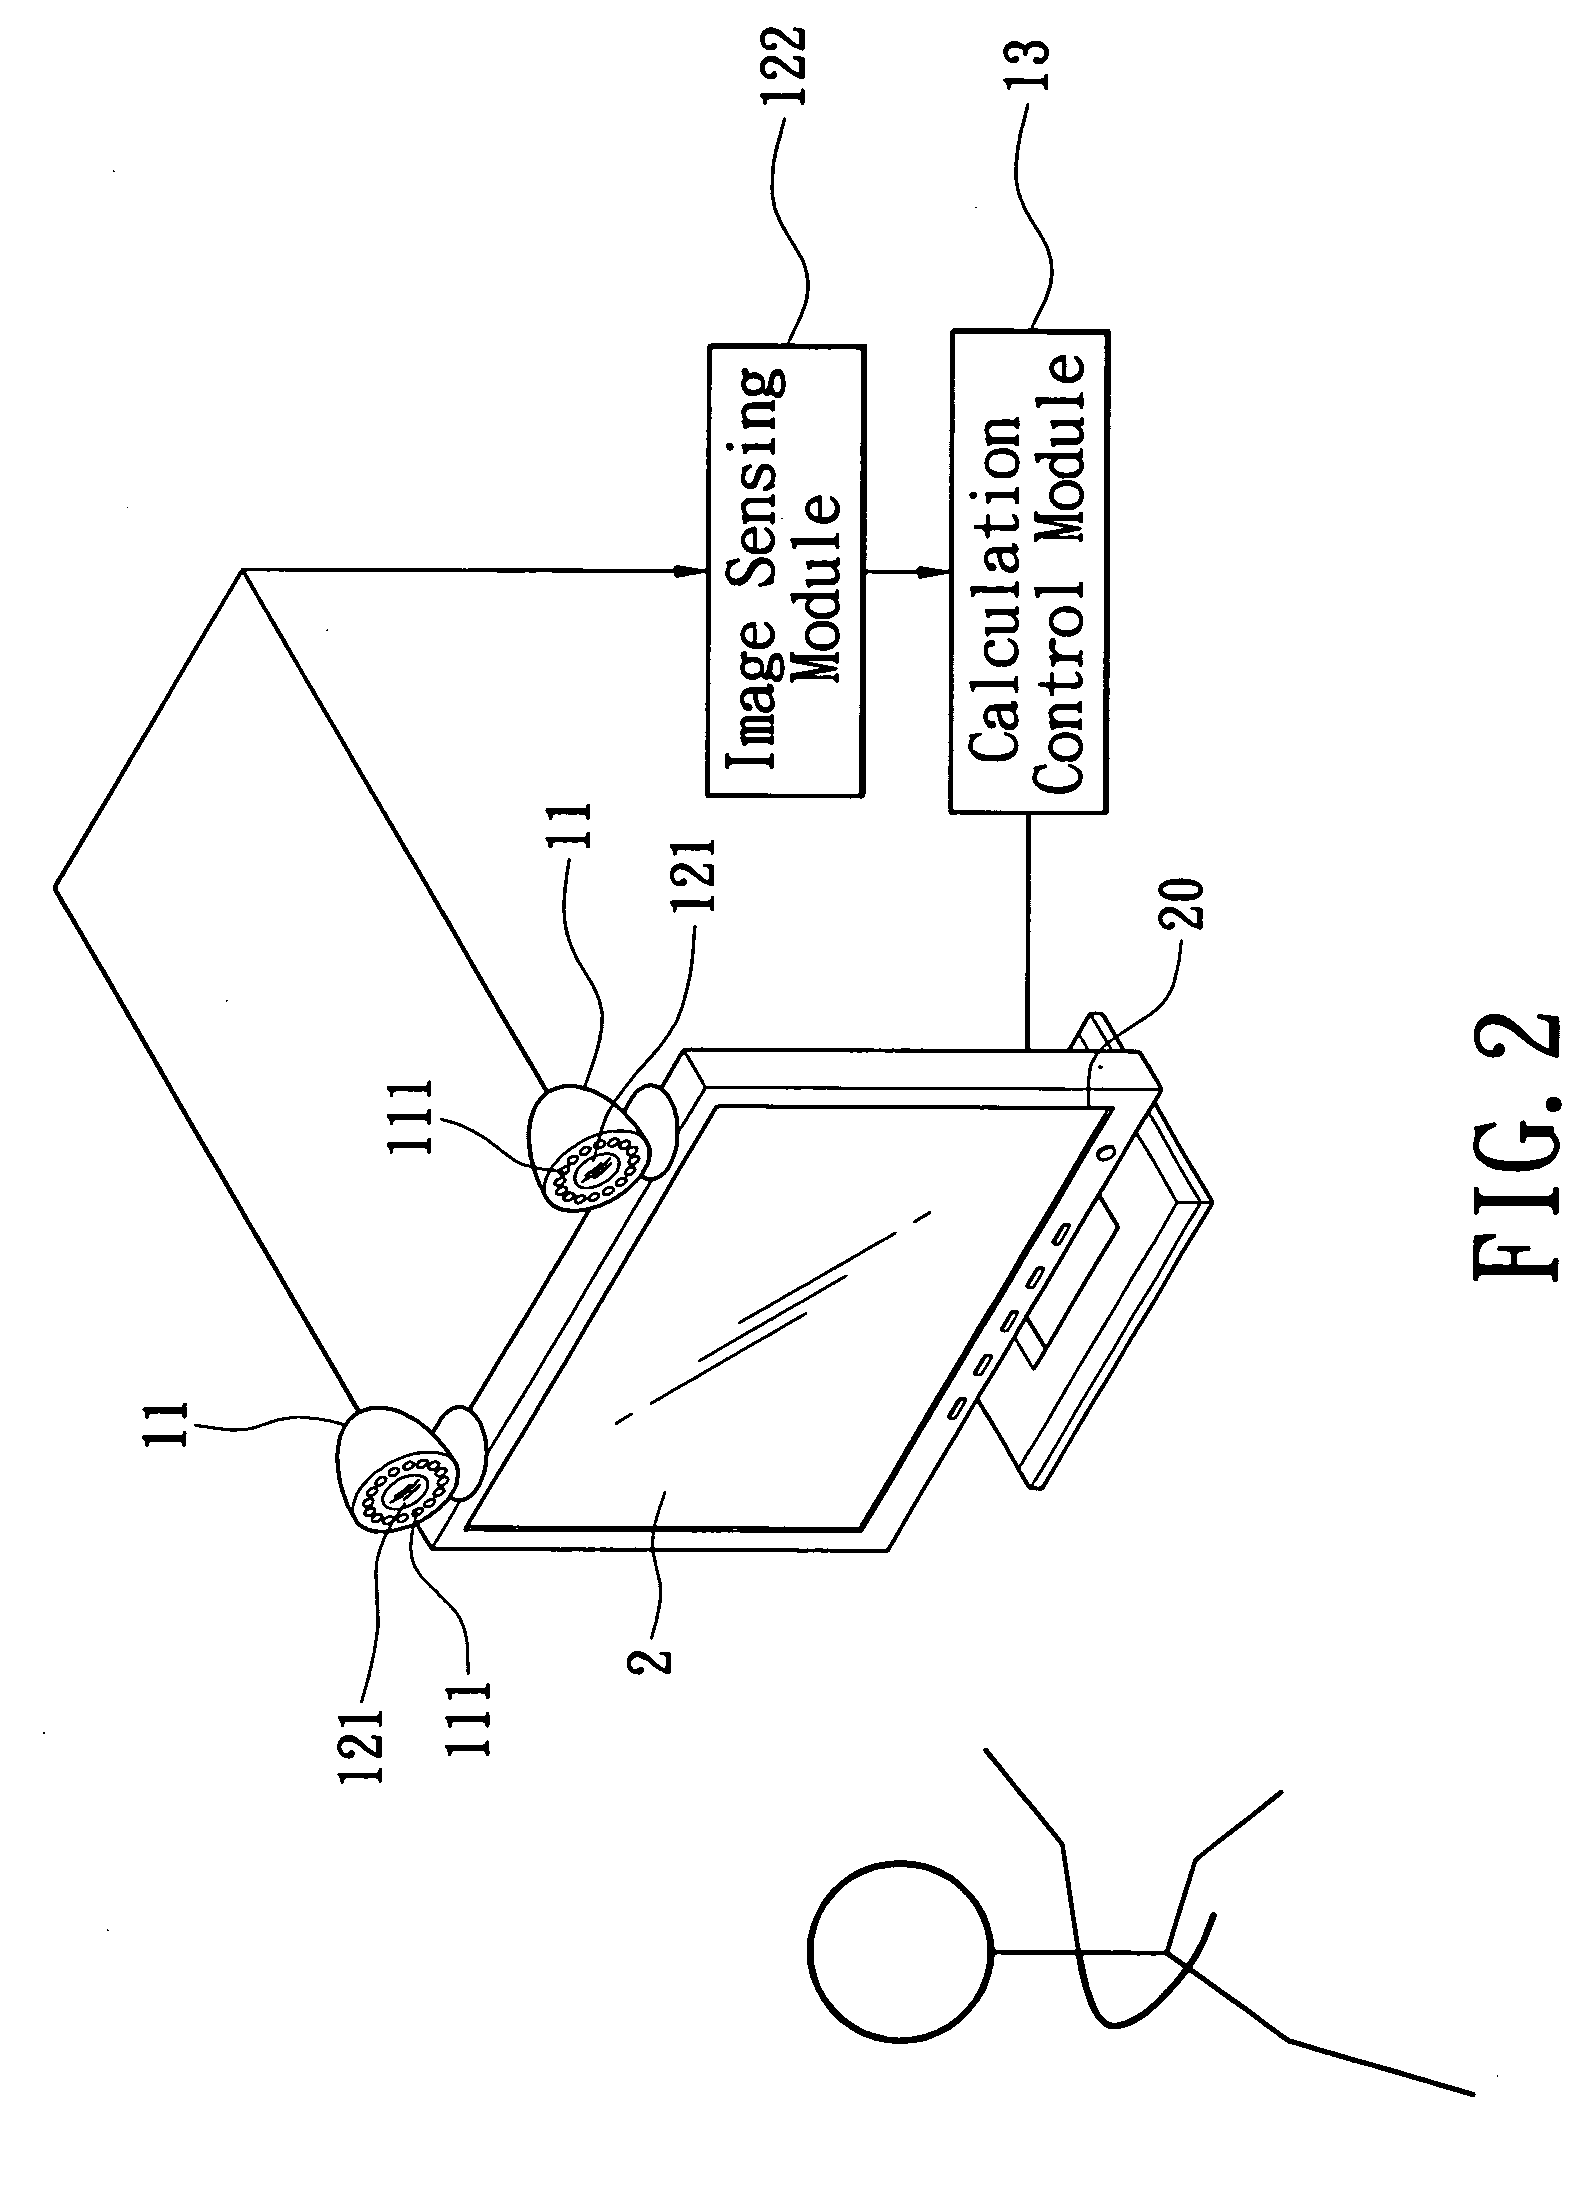 Operation device for a graphical user interface